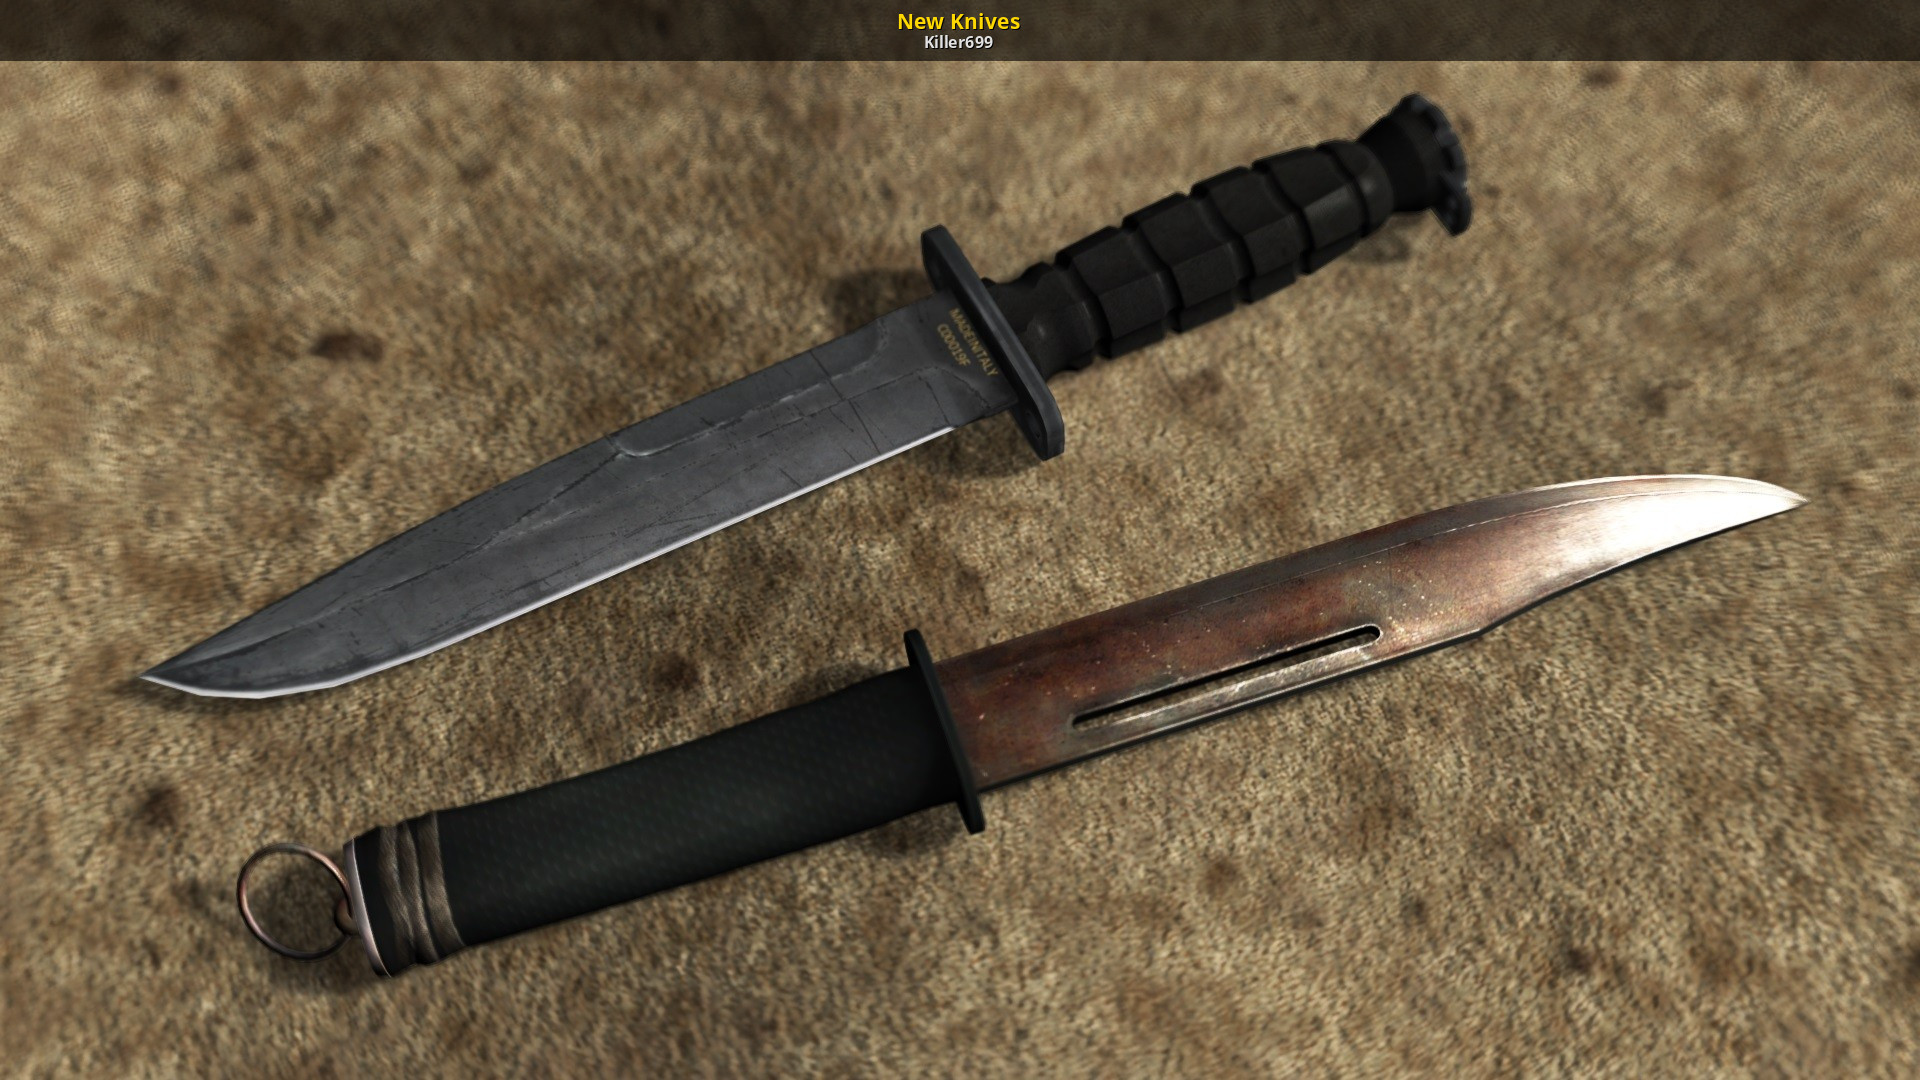 New Knives [Counter-Strike: Global Offensive] [Mods]